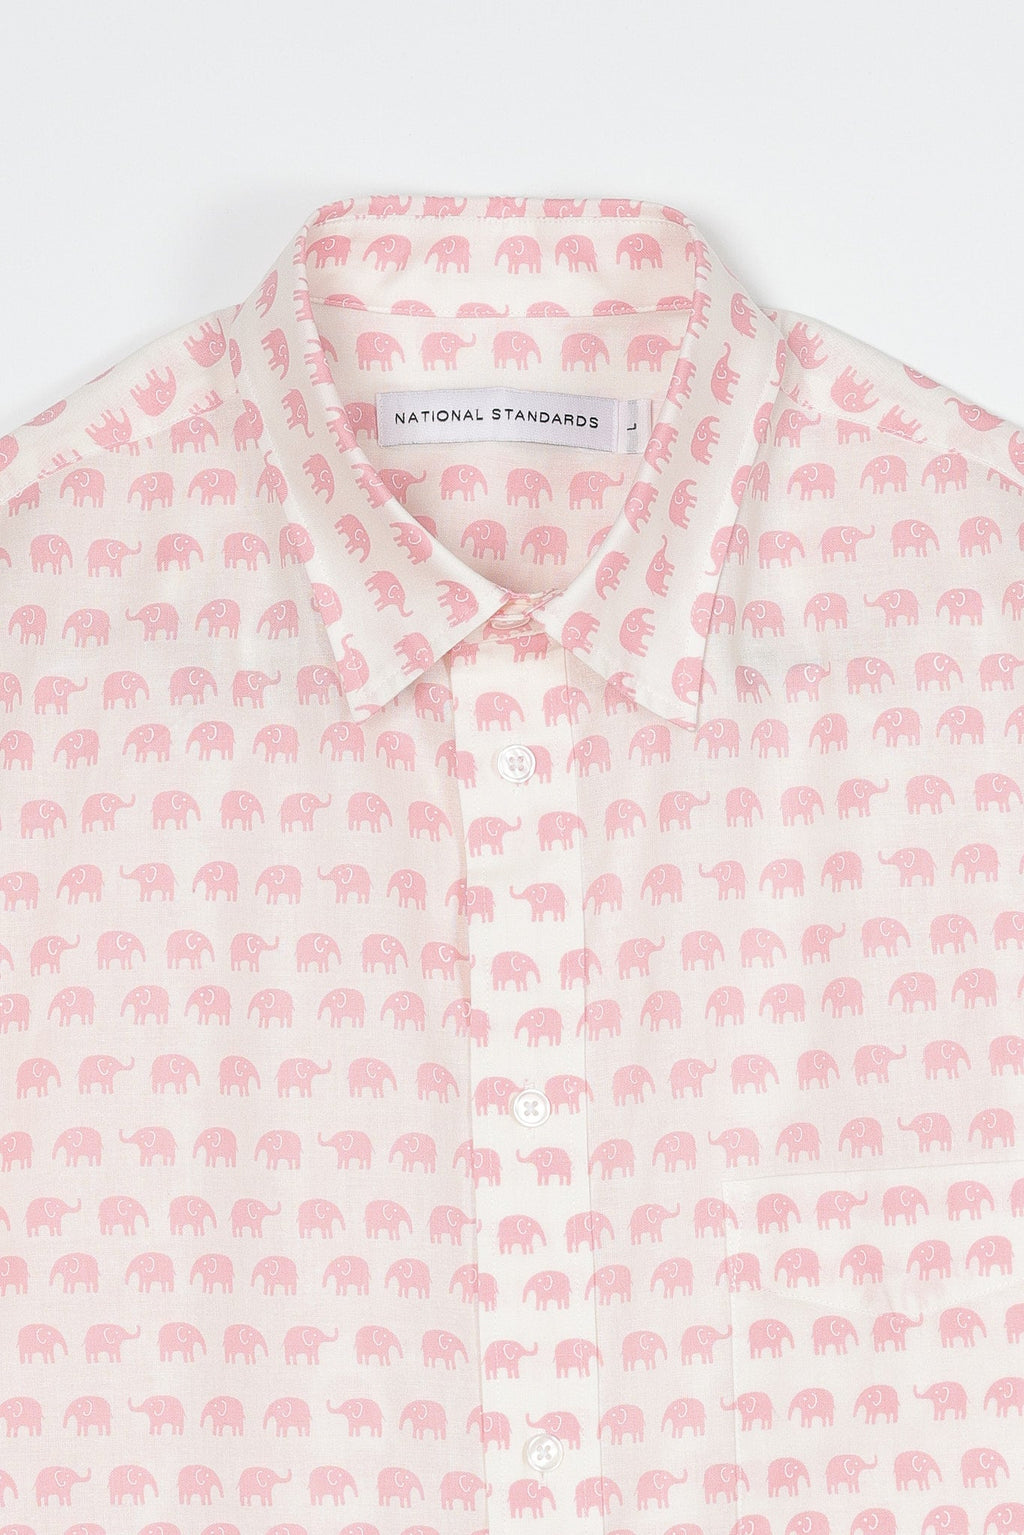 Japanese Pink Elephant Print in Pink 06